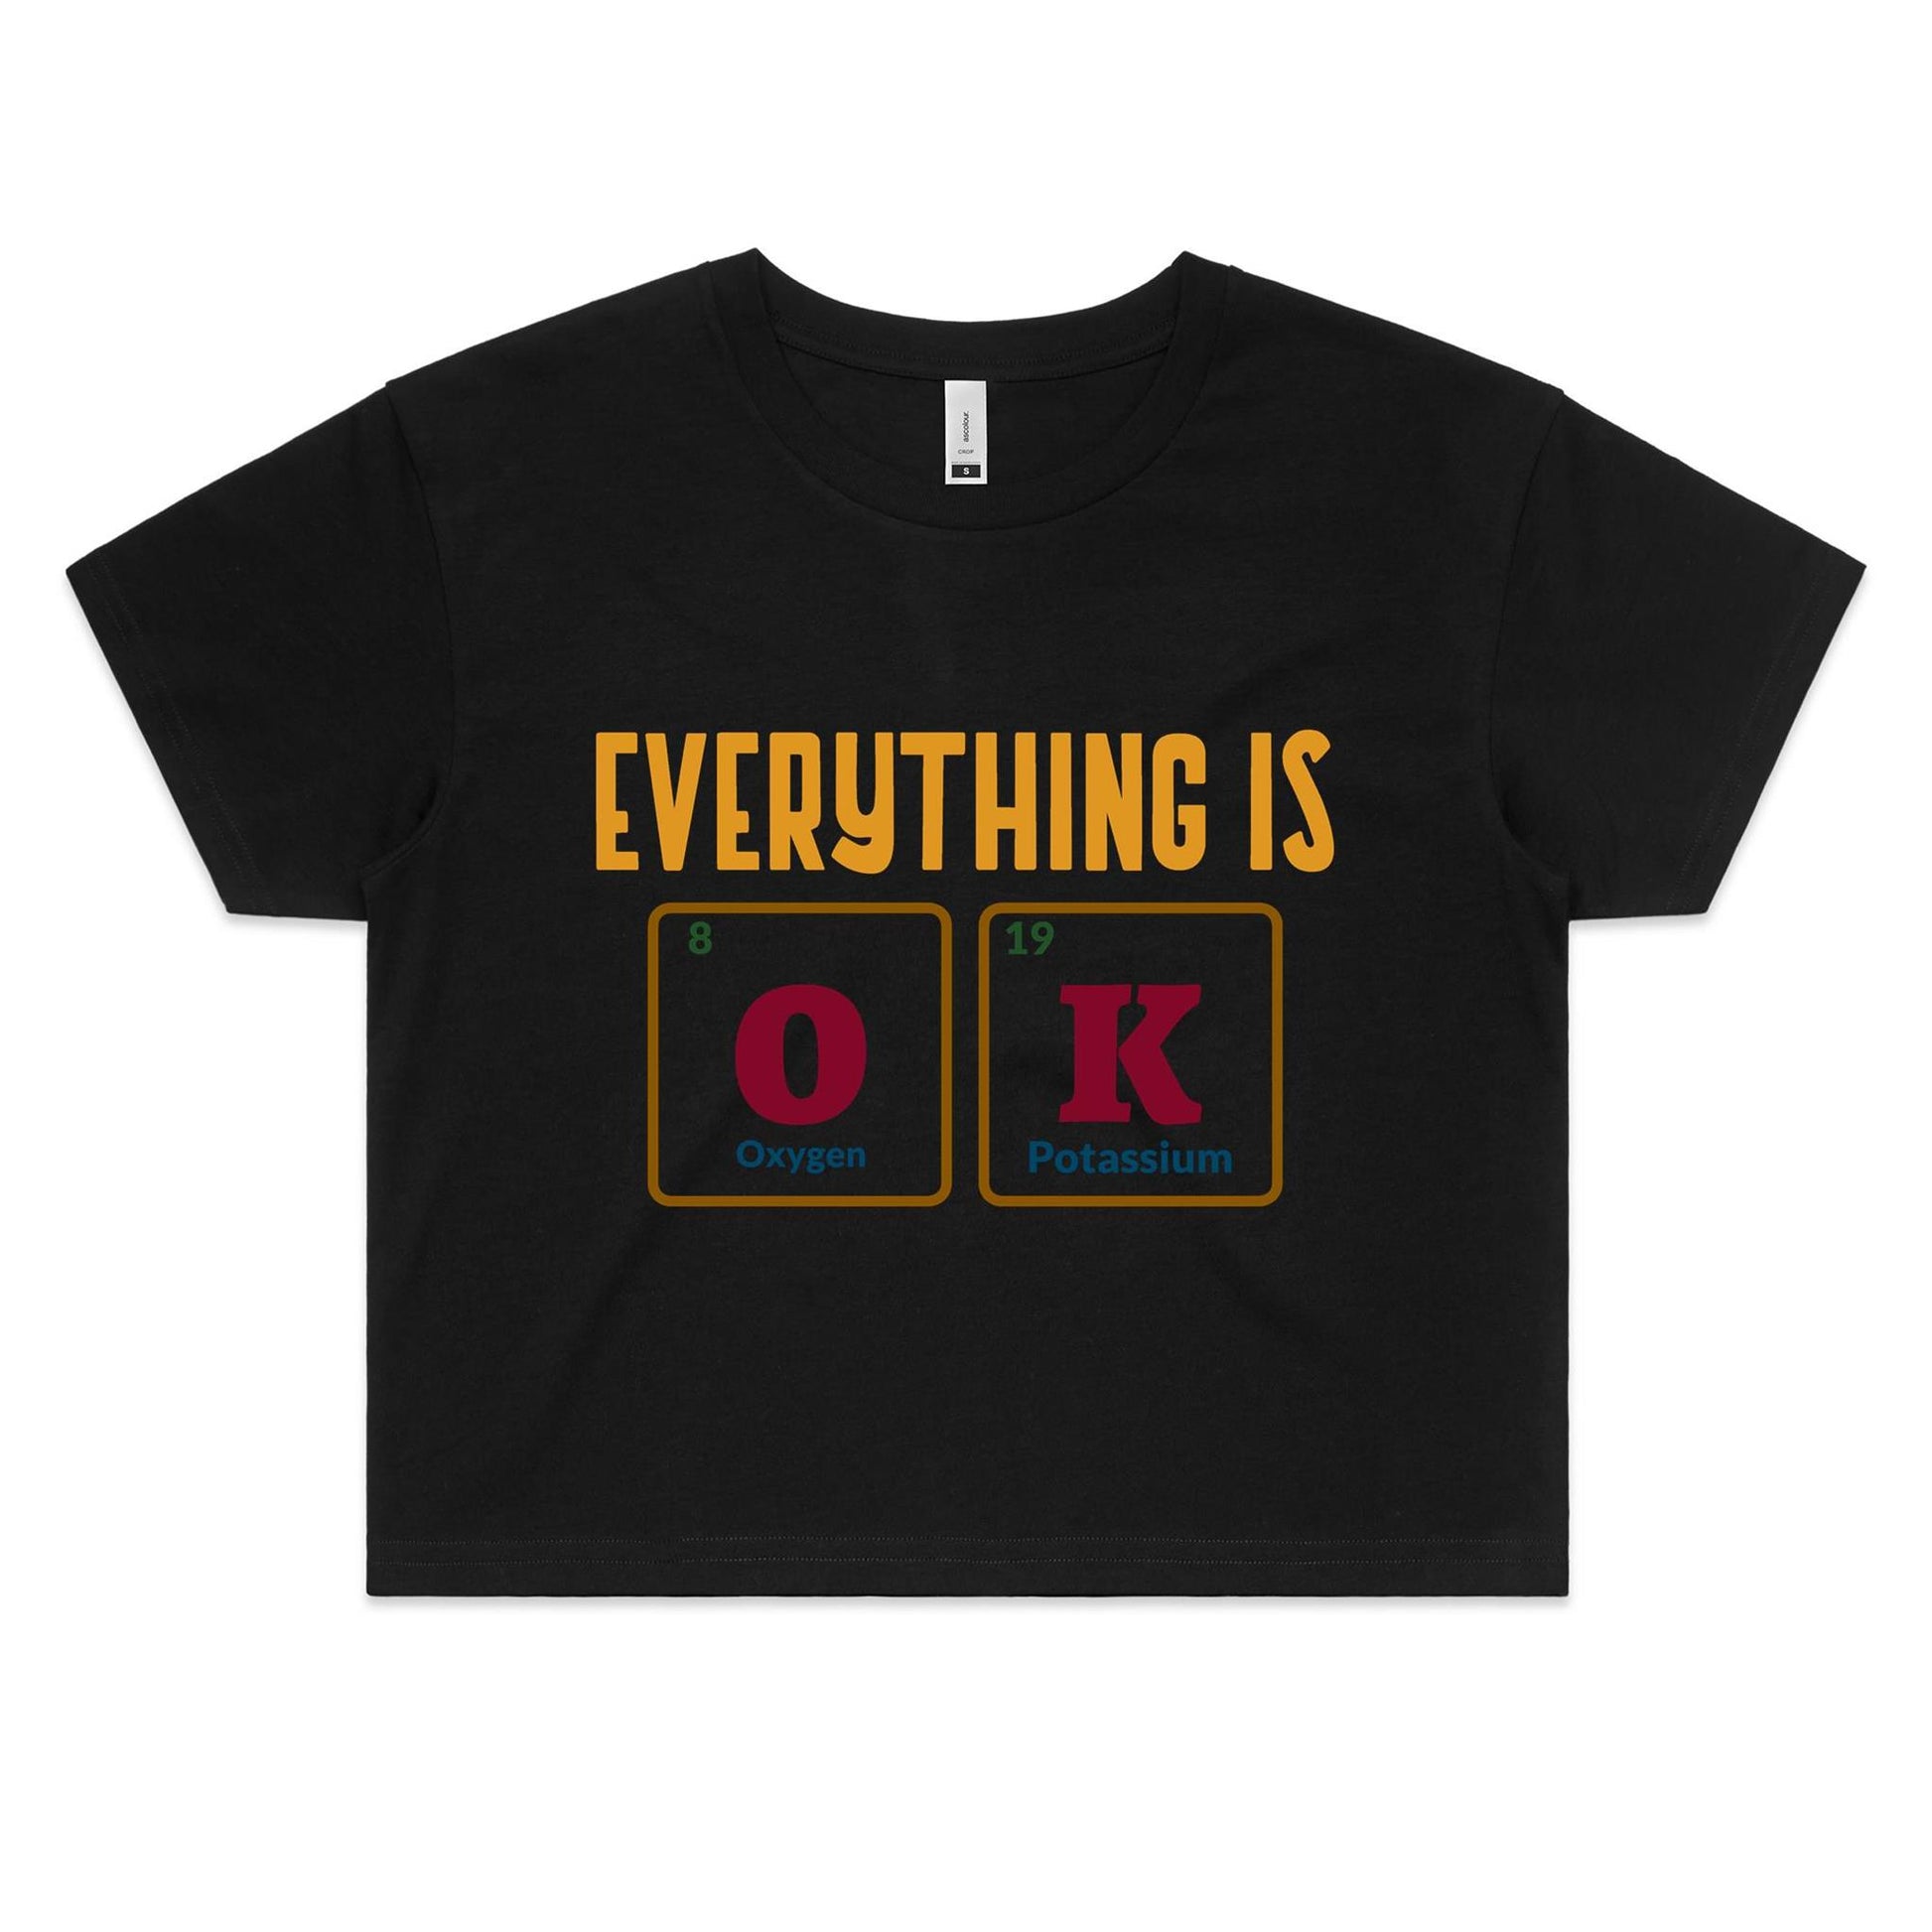 Everything Is OK, Periodic Table Of Elements - Women's Crop Tee Black Womens Crop Top Science